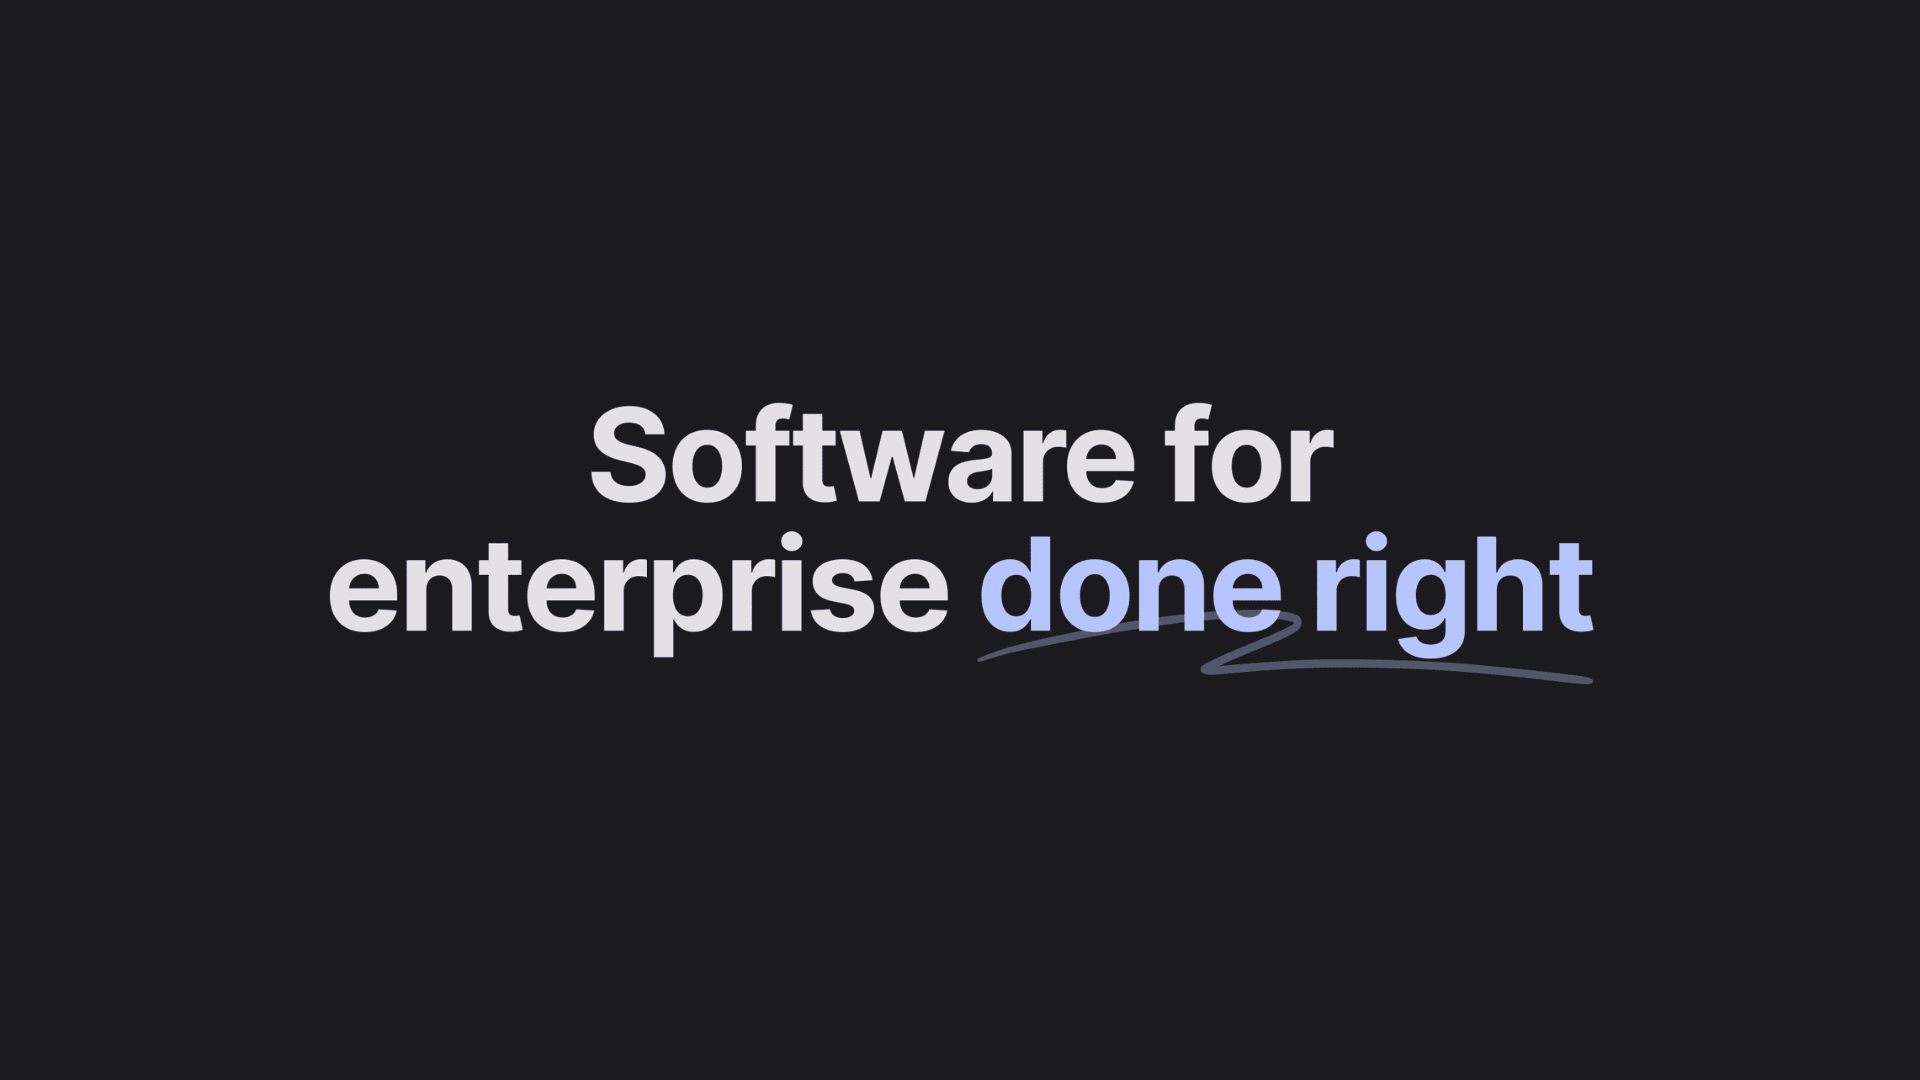 Text reading "Software for enterprise done right"